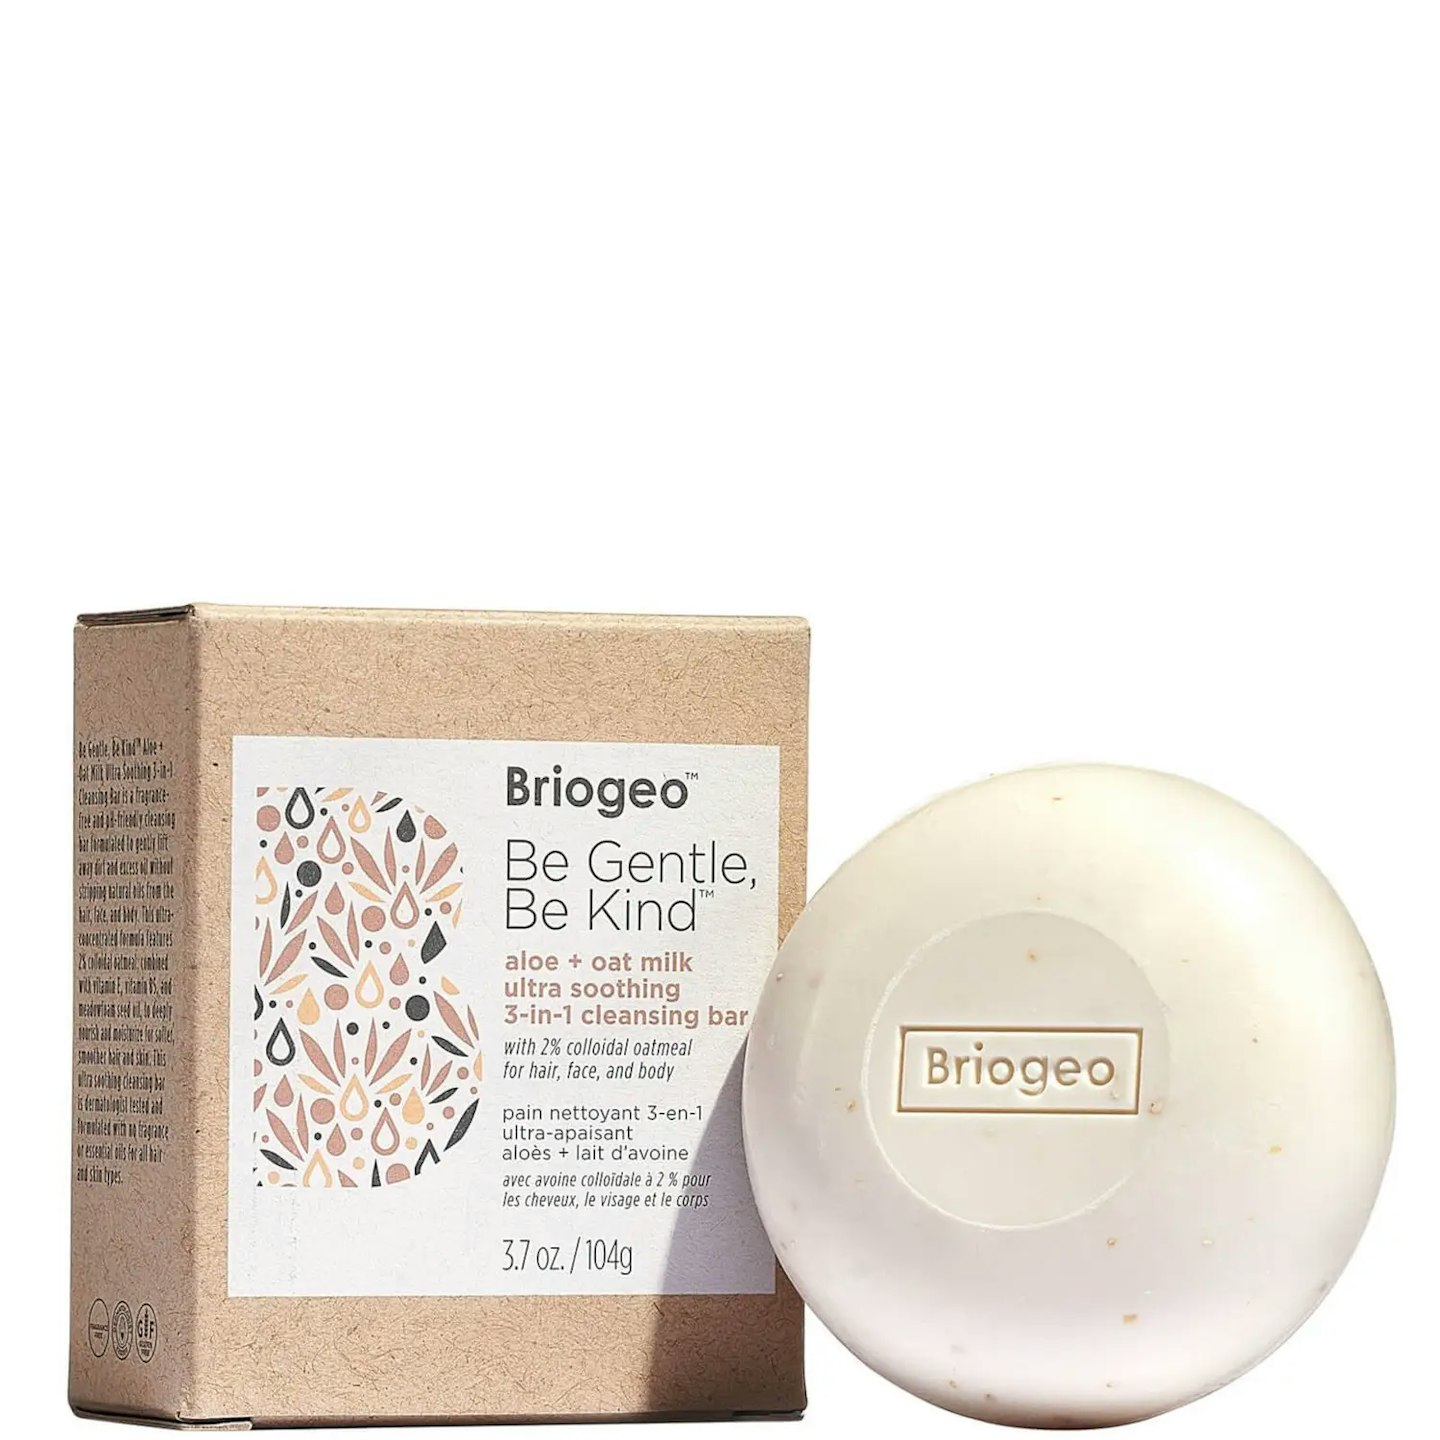 Briogeo Be Gentle, Be Kind Aloe And Oat Milk Ultra Soothing 3-In-1 Cleansing Bar